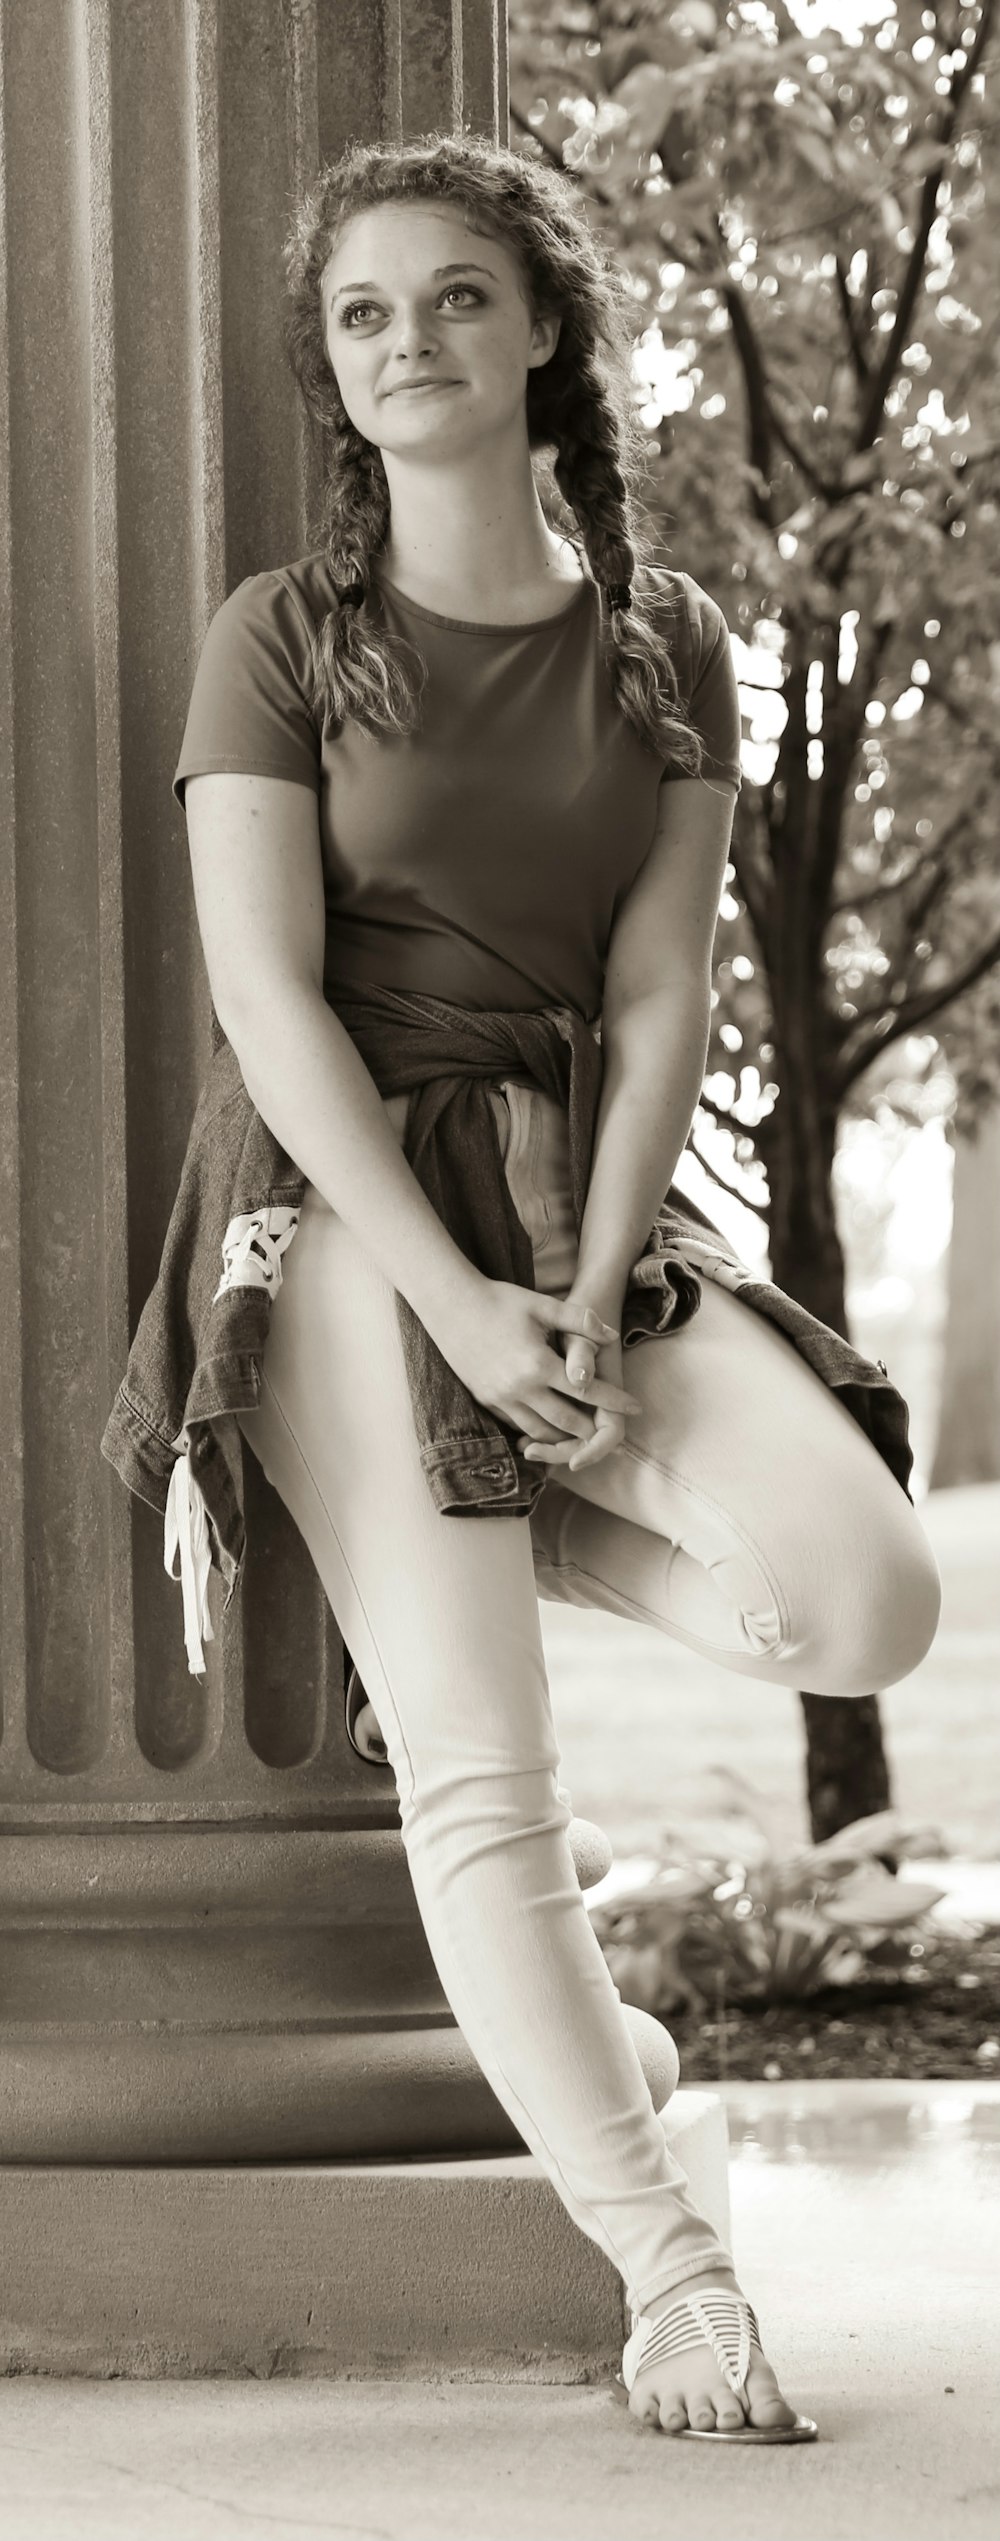 grayscale photo of woman wearing black tank top and skirt